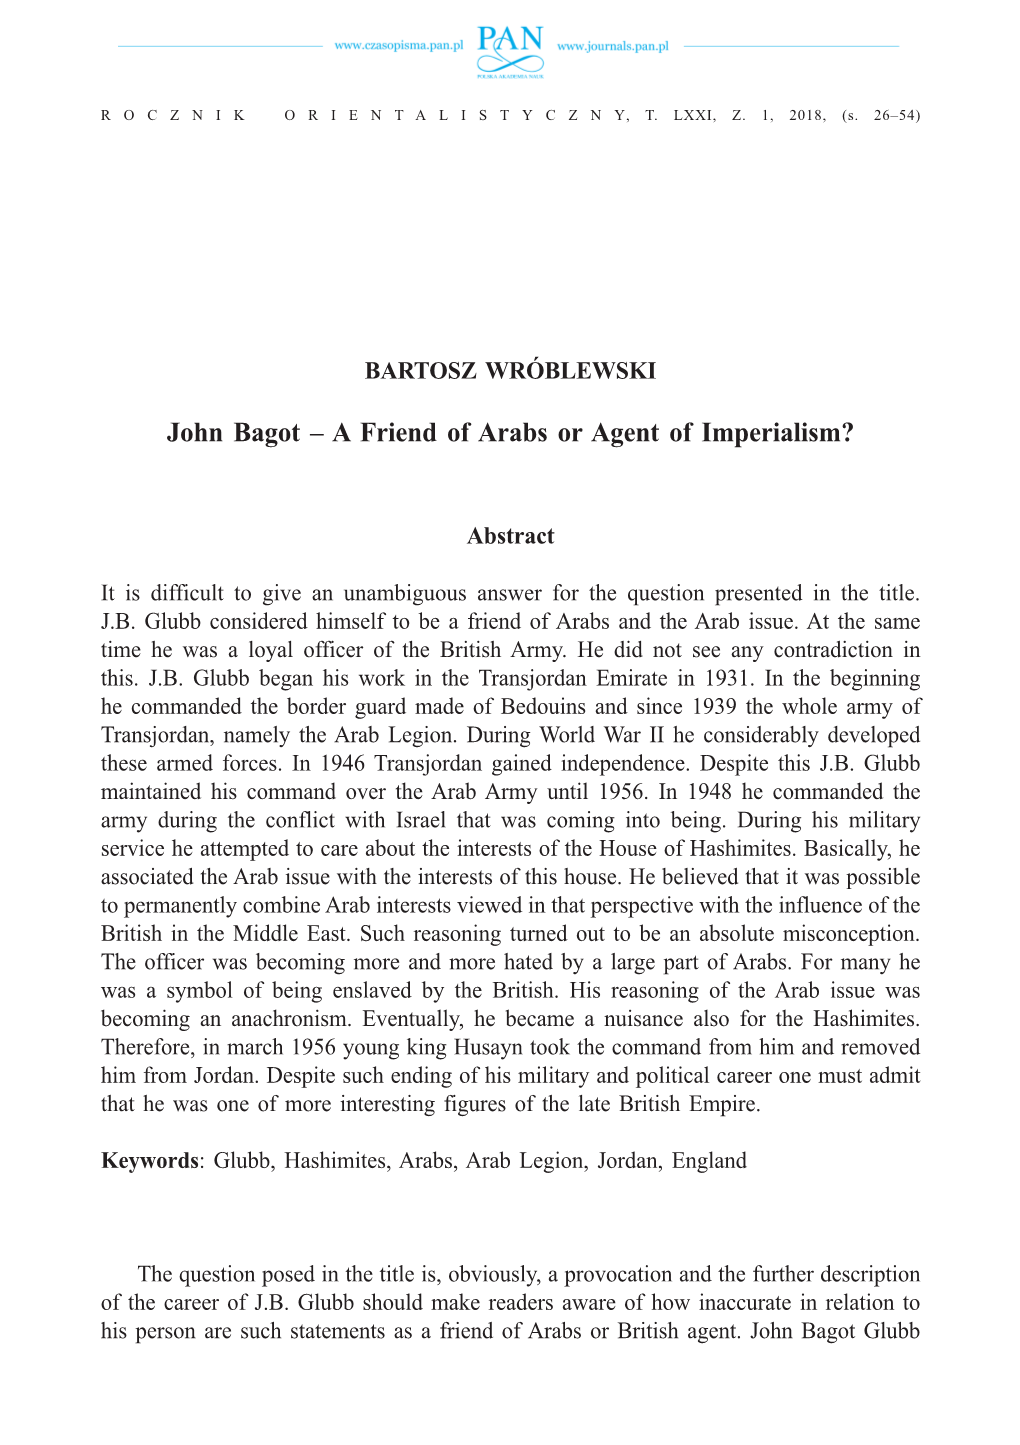 John Bagot – a Friend of Arabs Or Agent of Imperialism?